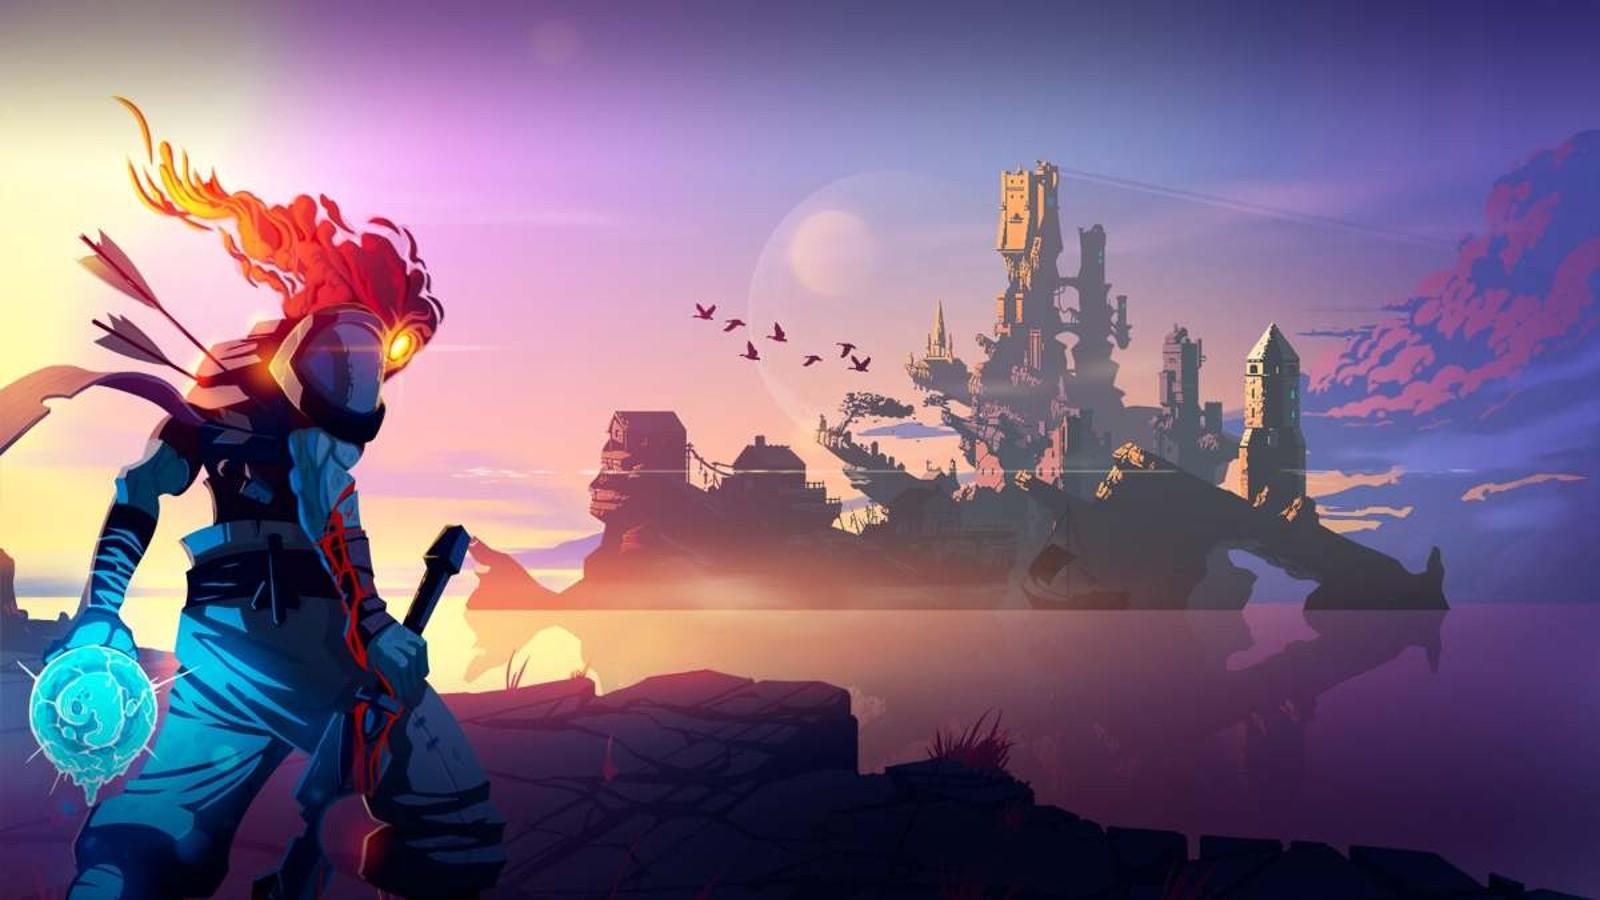 An image of Dead Cells keyart, one of the best roguelike games.